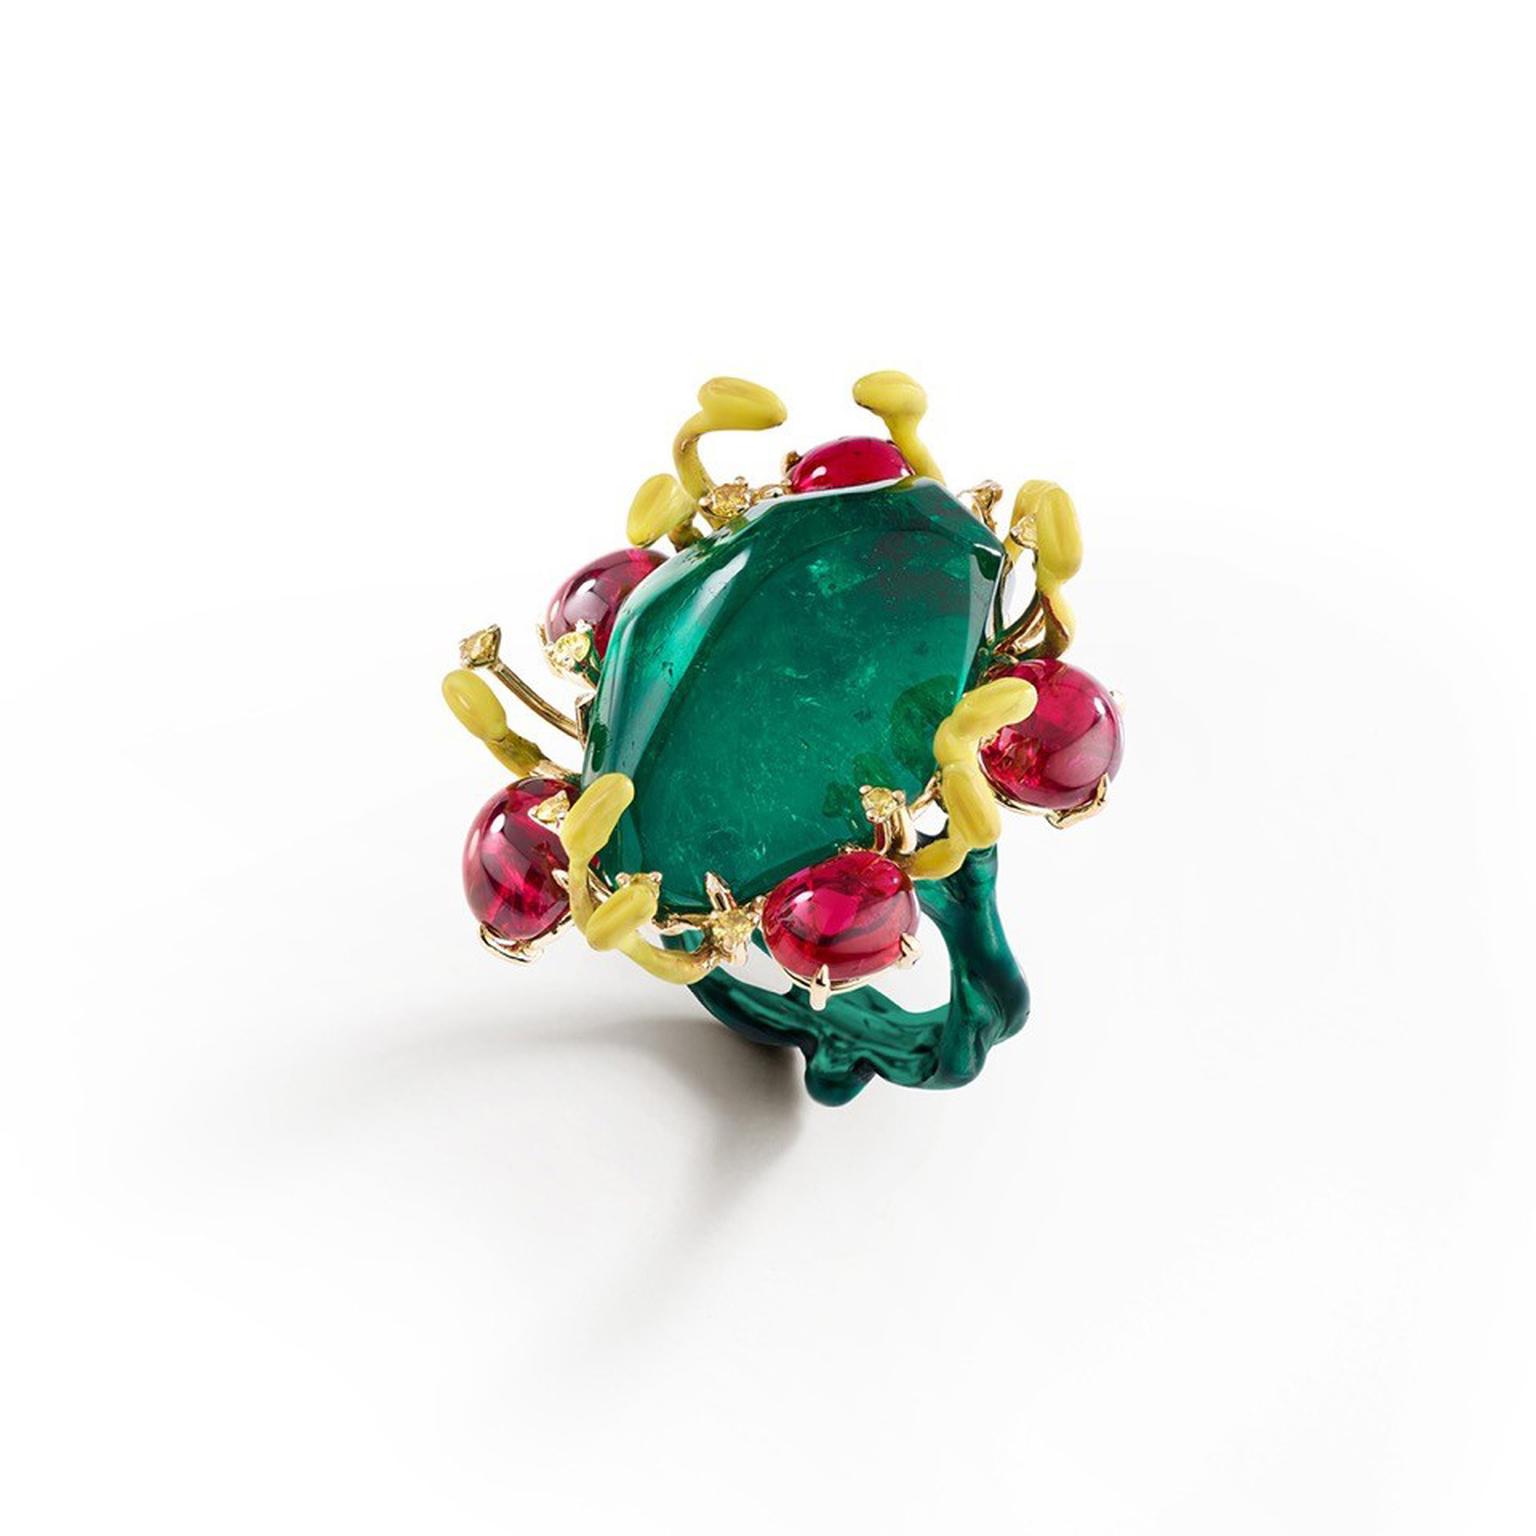 Suzanne Syz Power to the Flower ring